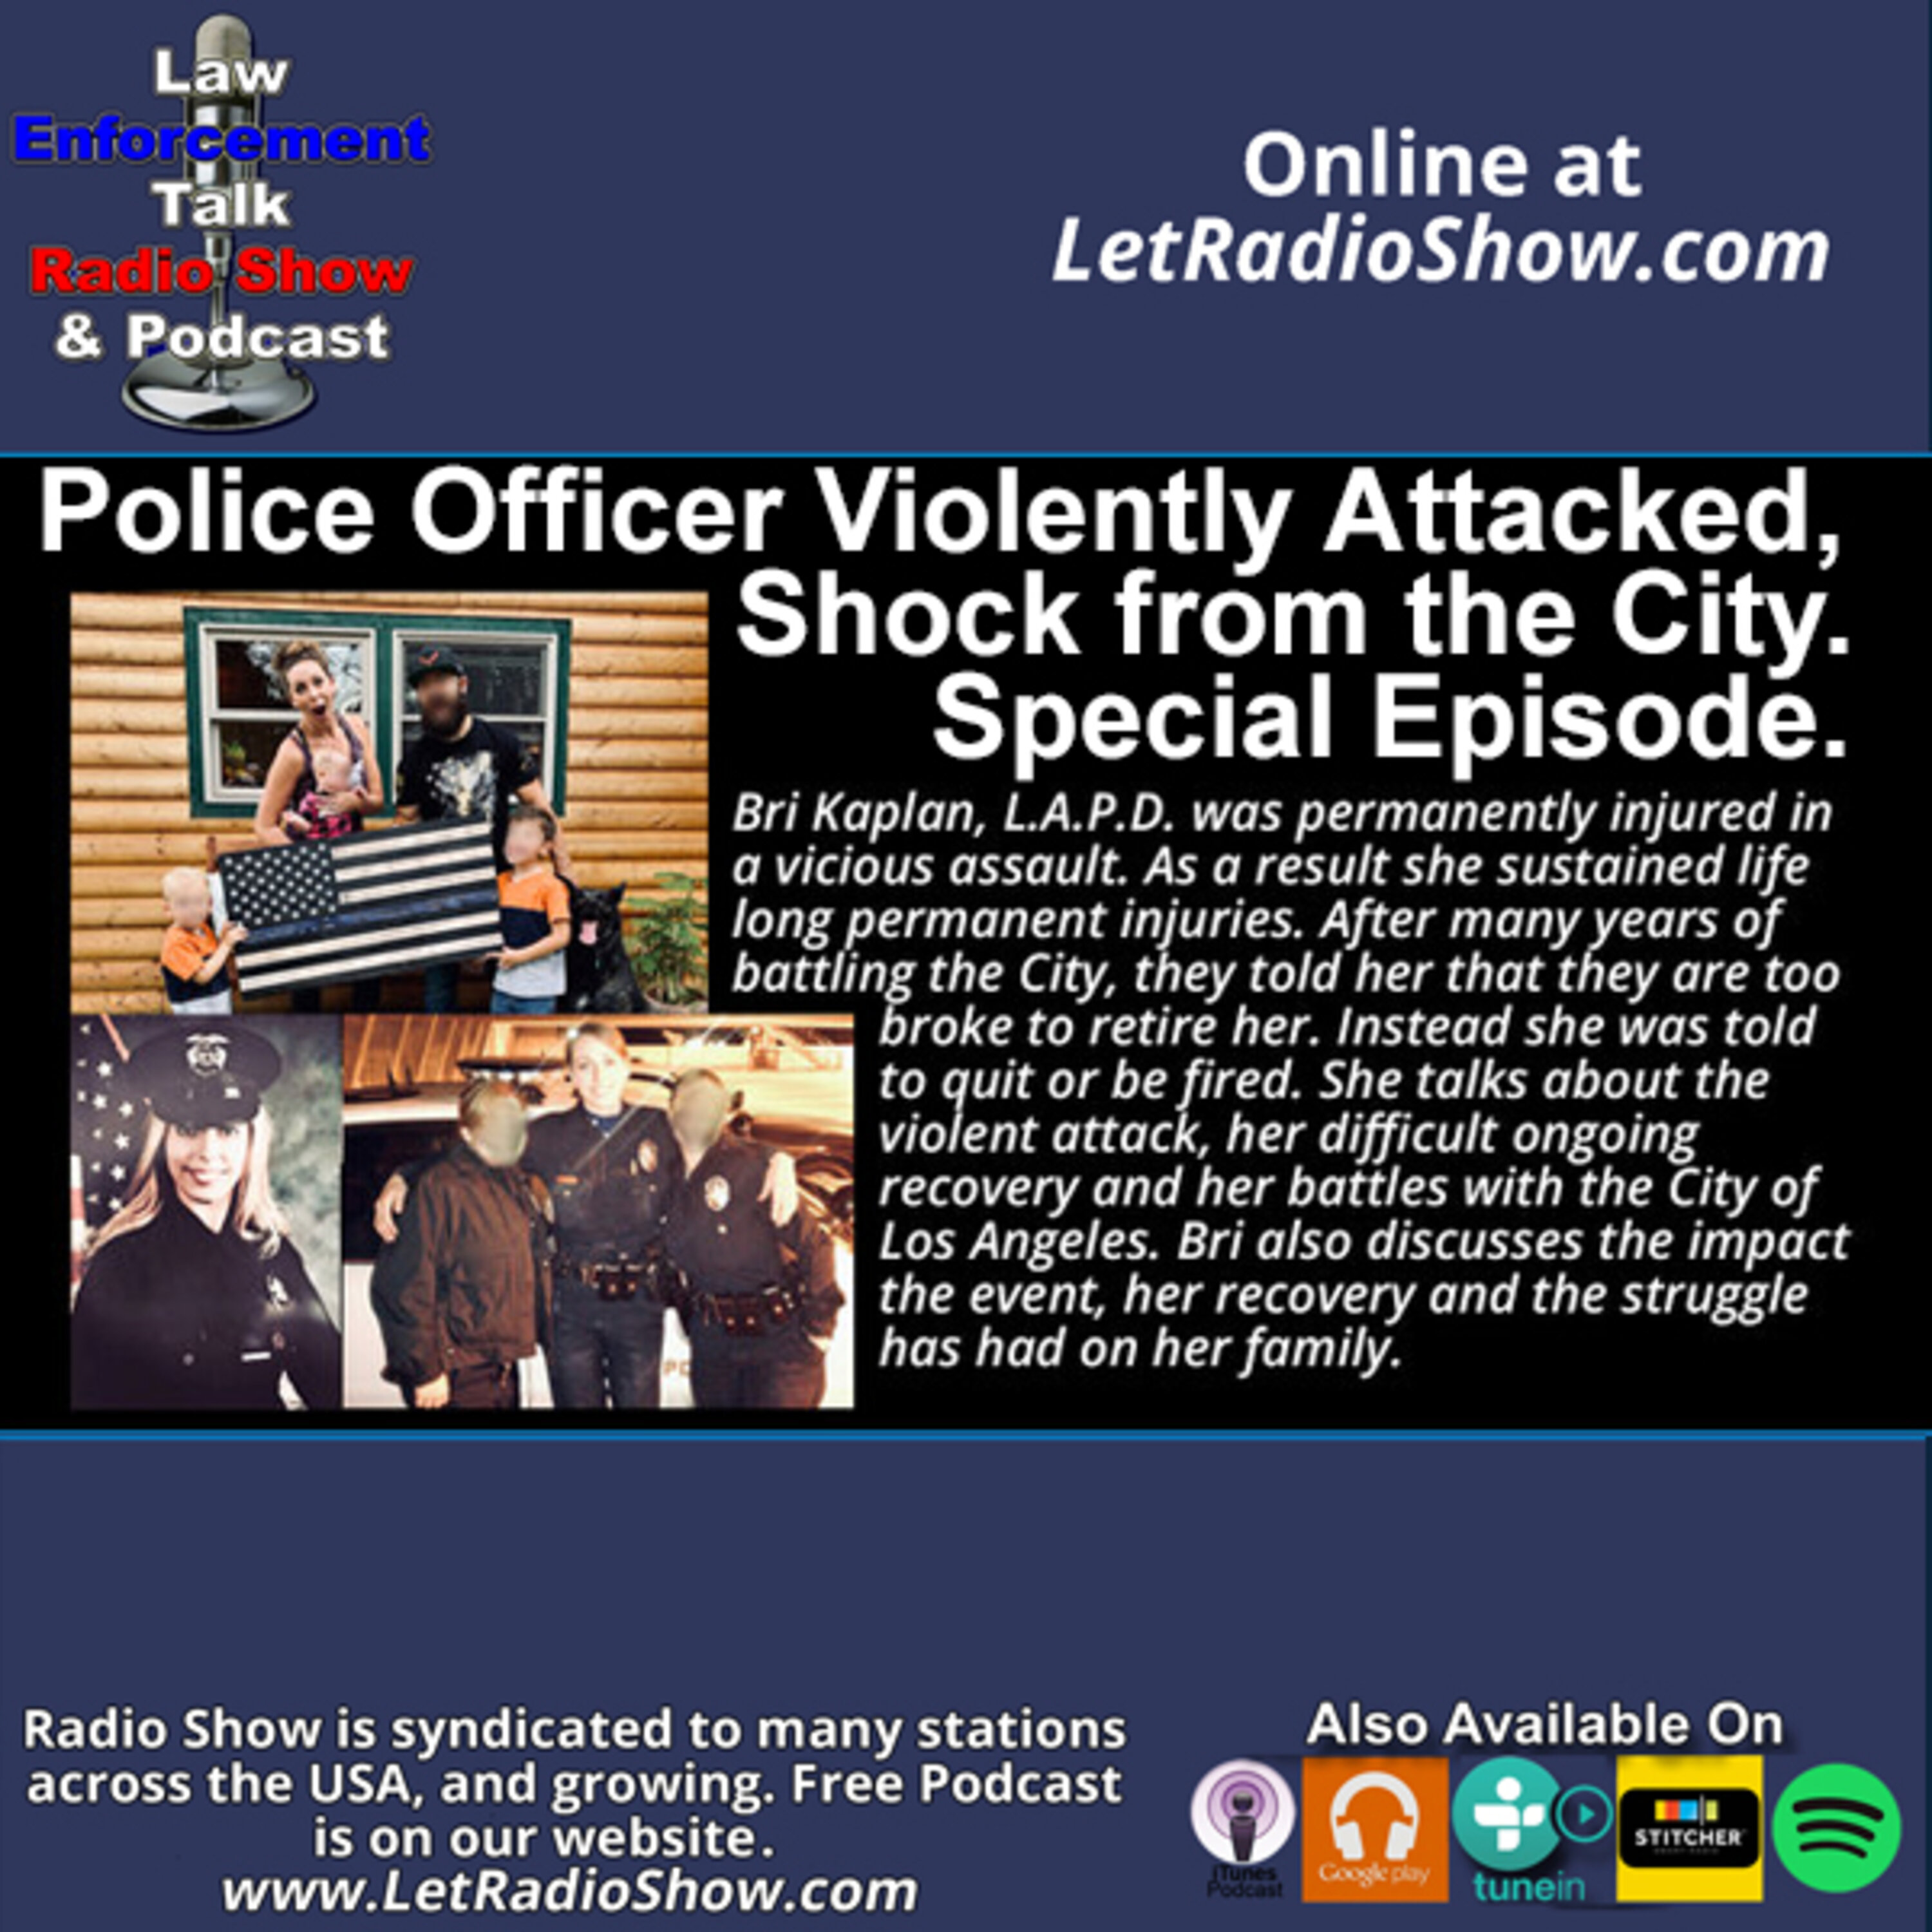 Police Officer Violently Attacked, Shock from the City. Special Episode.